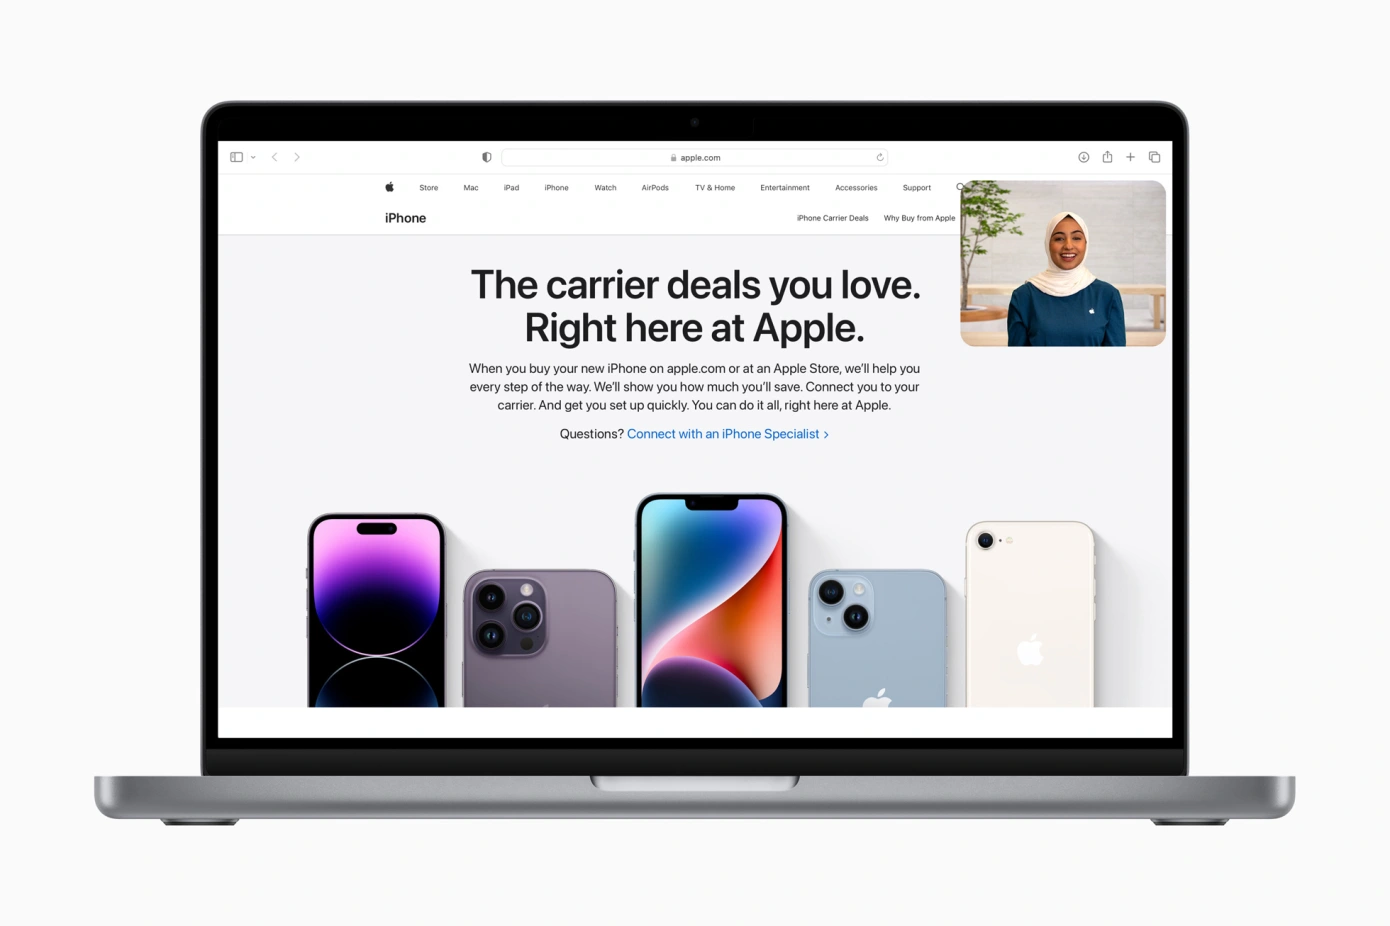 Apple launched Shop with a Specialist - a video chat for shopping